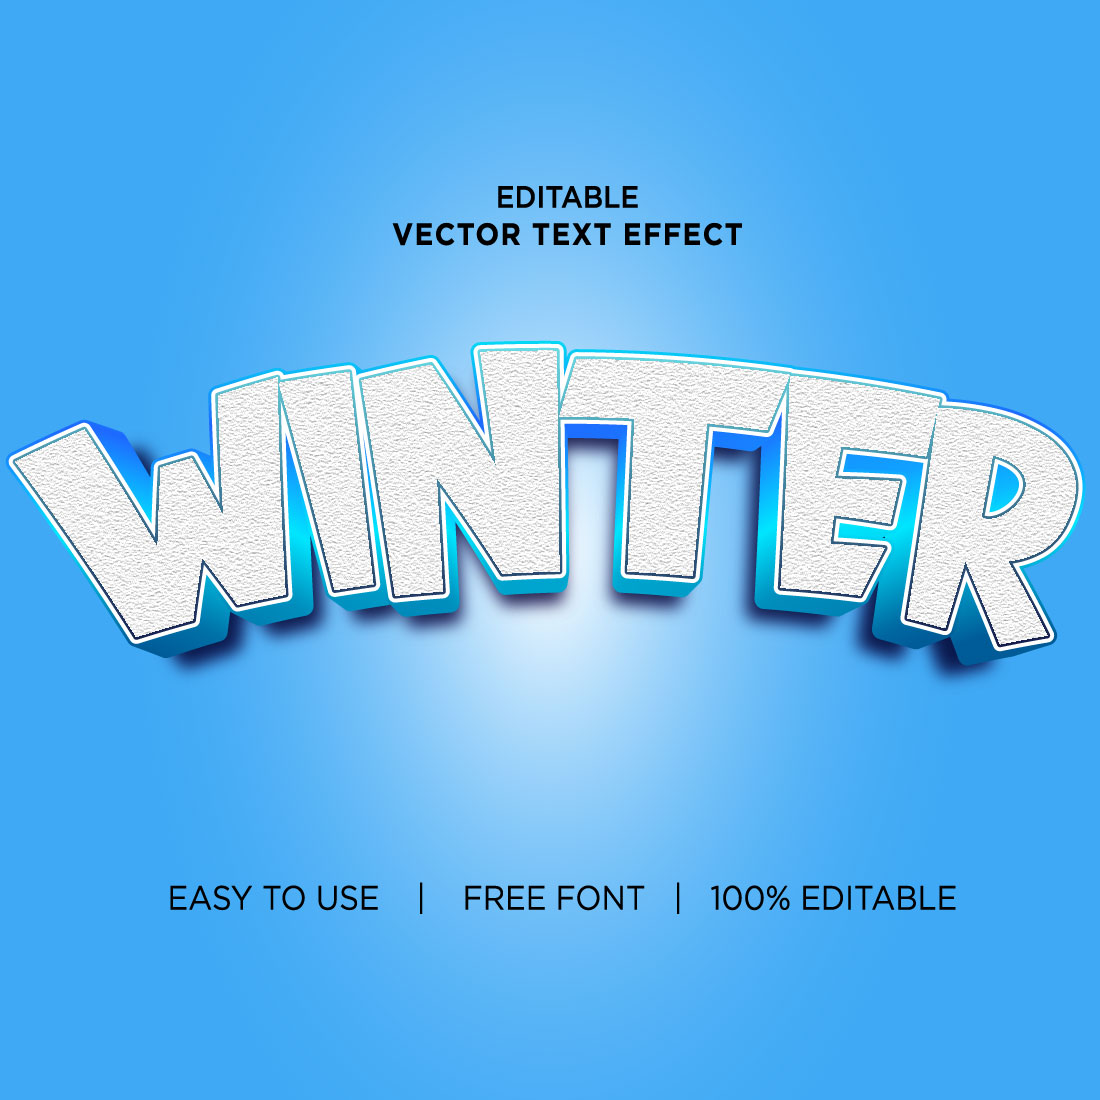 Winter 3d text effects vector illustrations New Text style eps files Editable text effect vector, 3d editable text effect vector cover image.